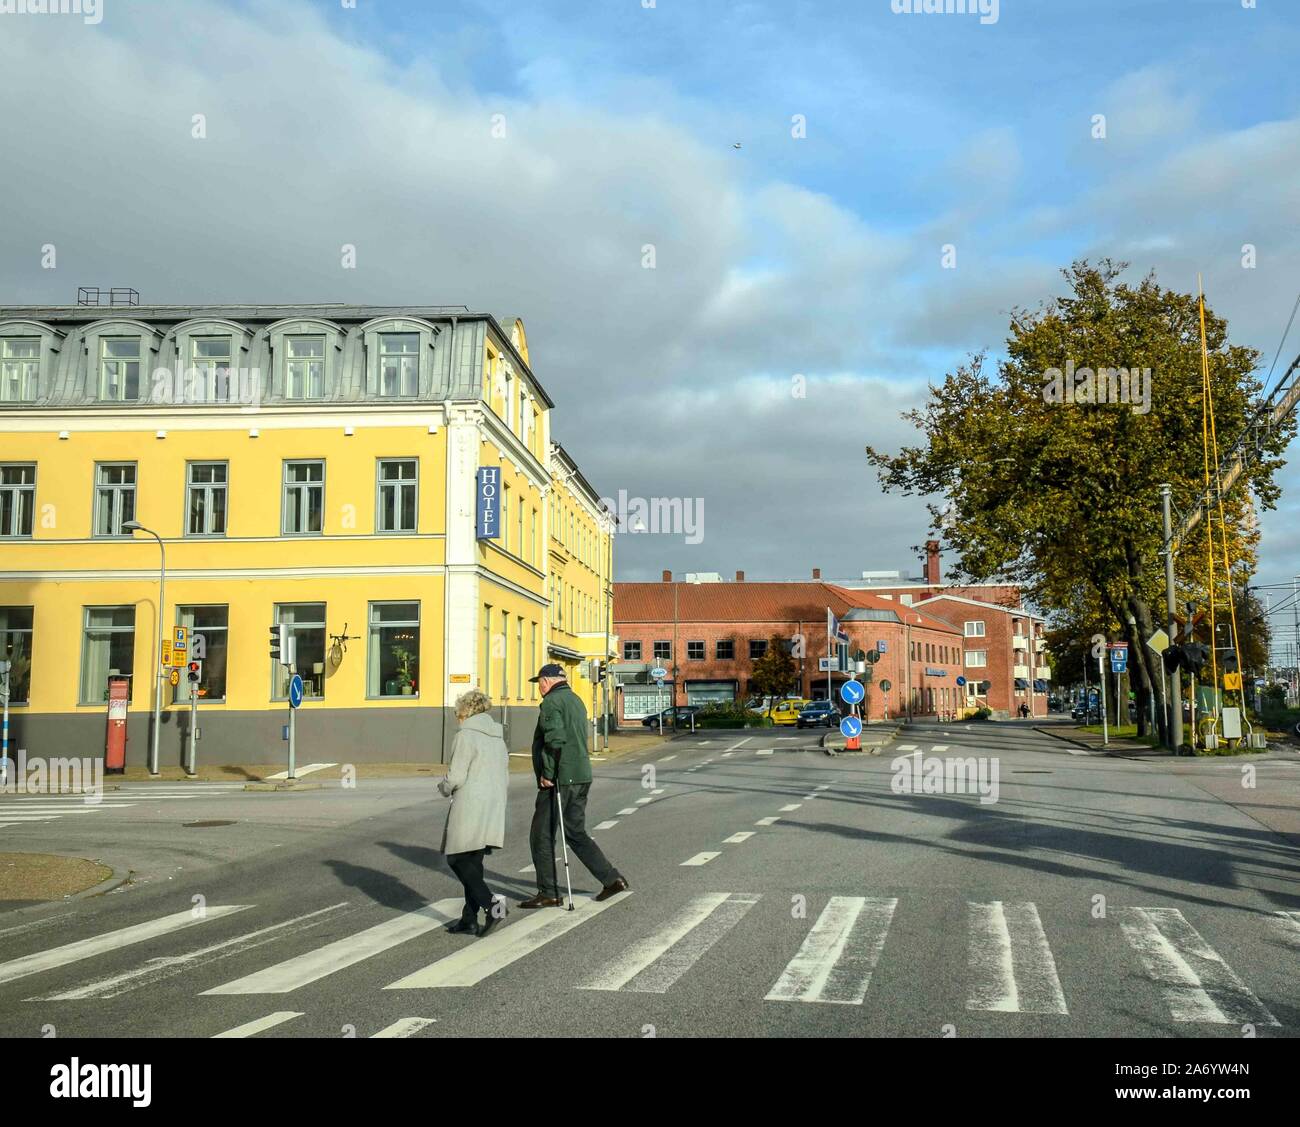 An elderly couple on a pedestrian crossing in front of a bright yellow hotel in Ystad, Sweden. Stock Photo